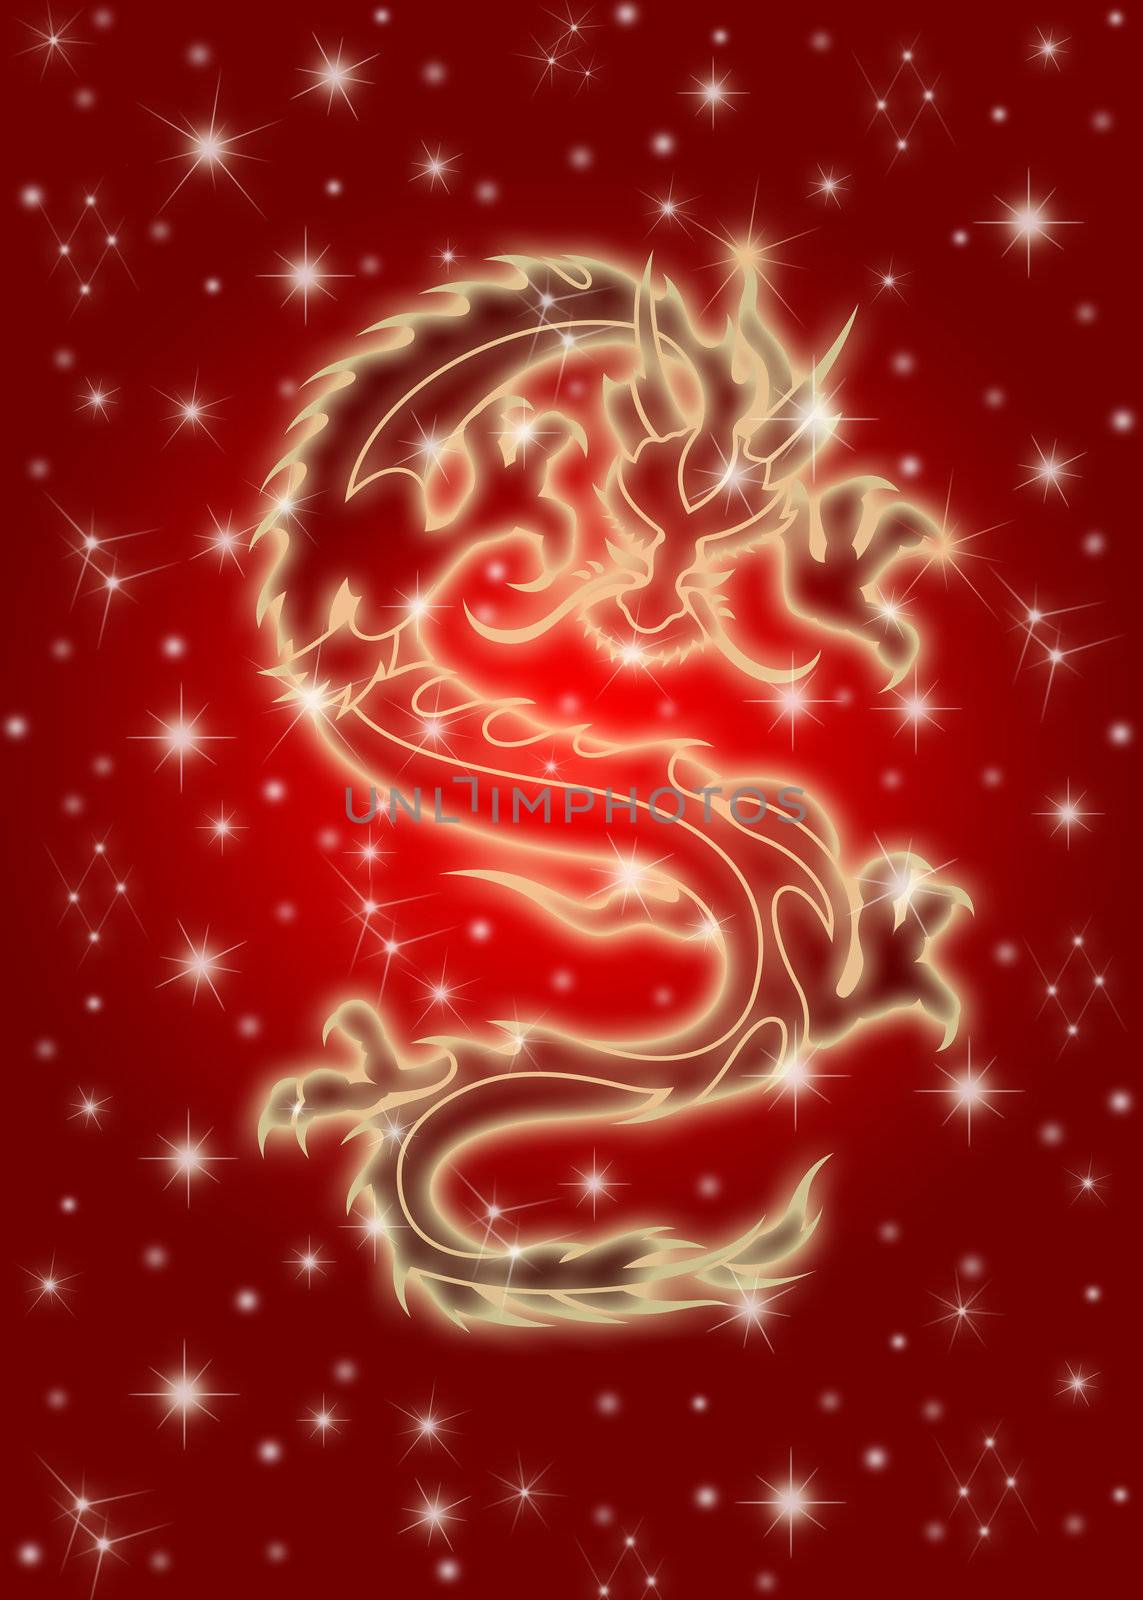 Zodiac Celestial Chinese Dragon Flying on Red Background Illustration